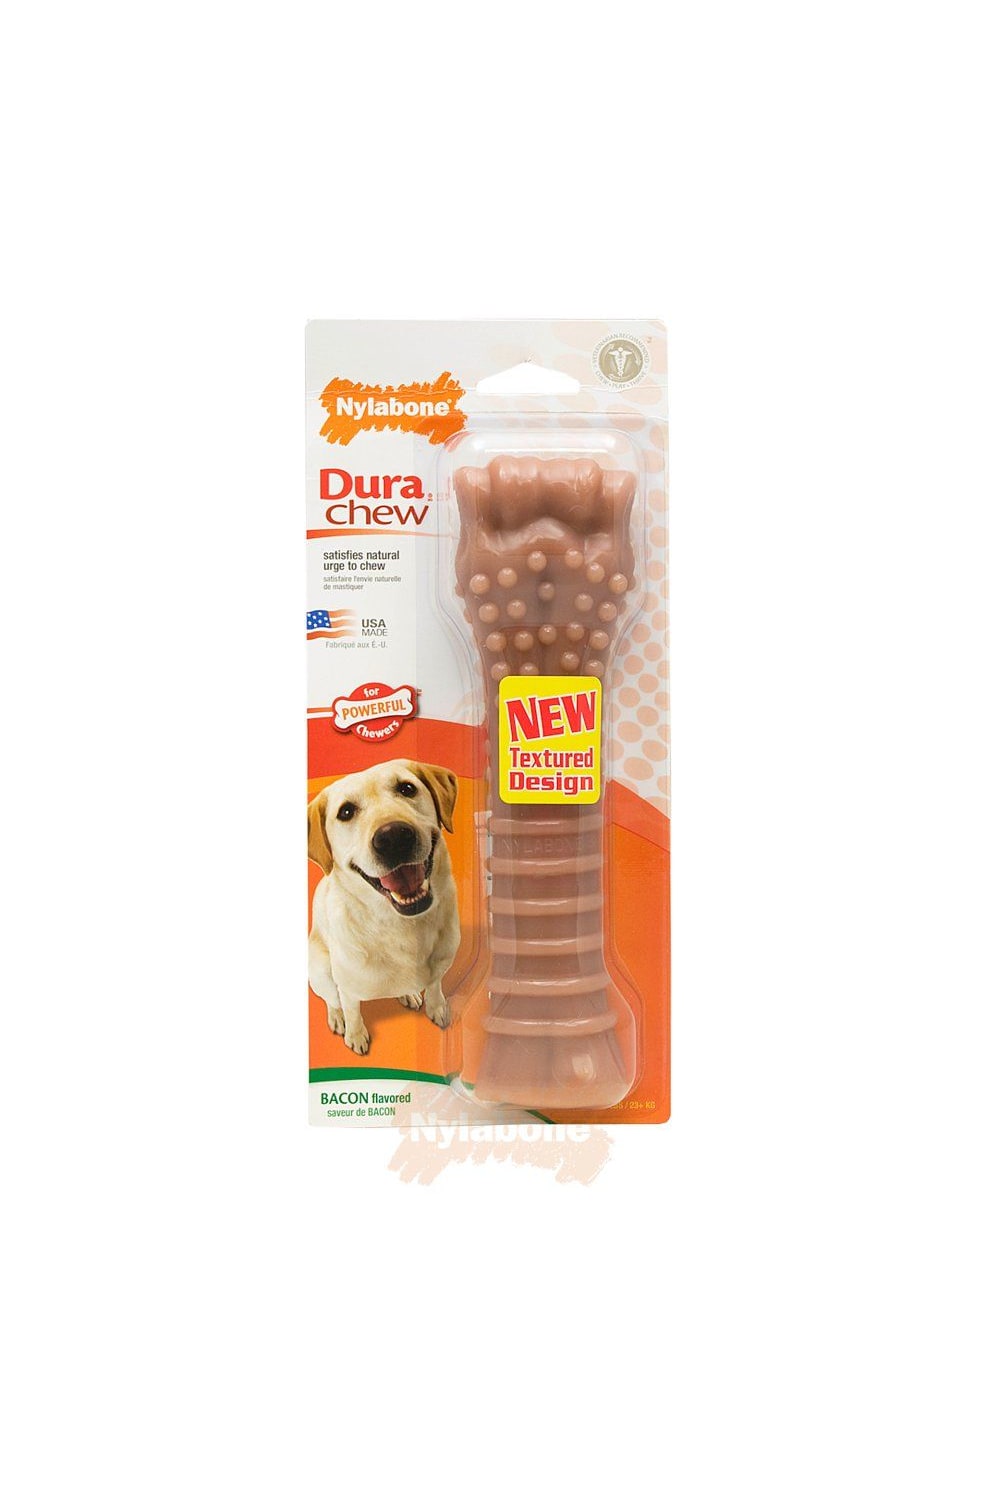 Nylabone Bacon Impregnated Bone For Larger Dogs (May Vary) (One Size)